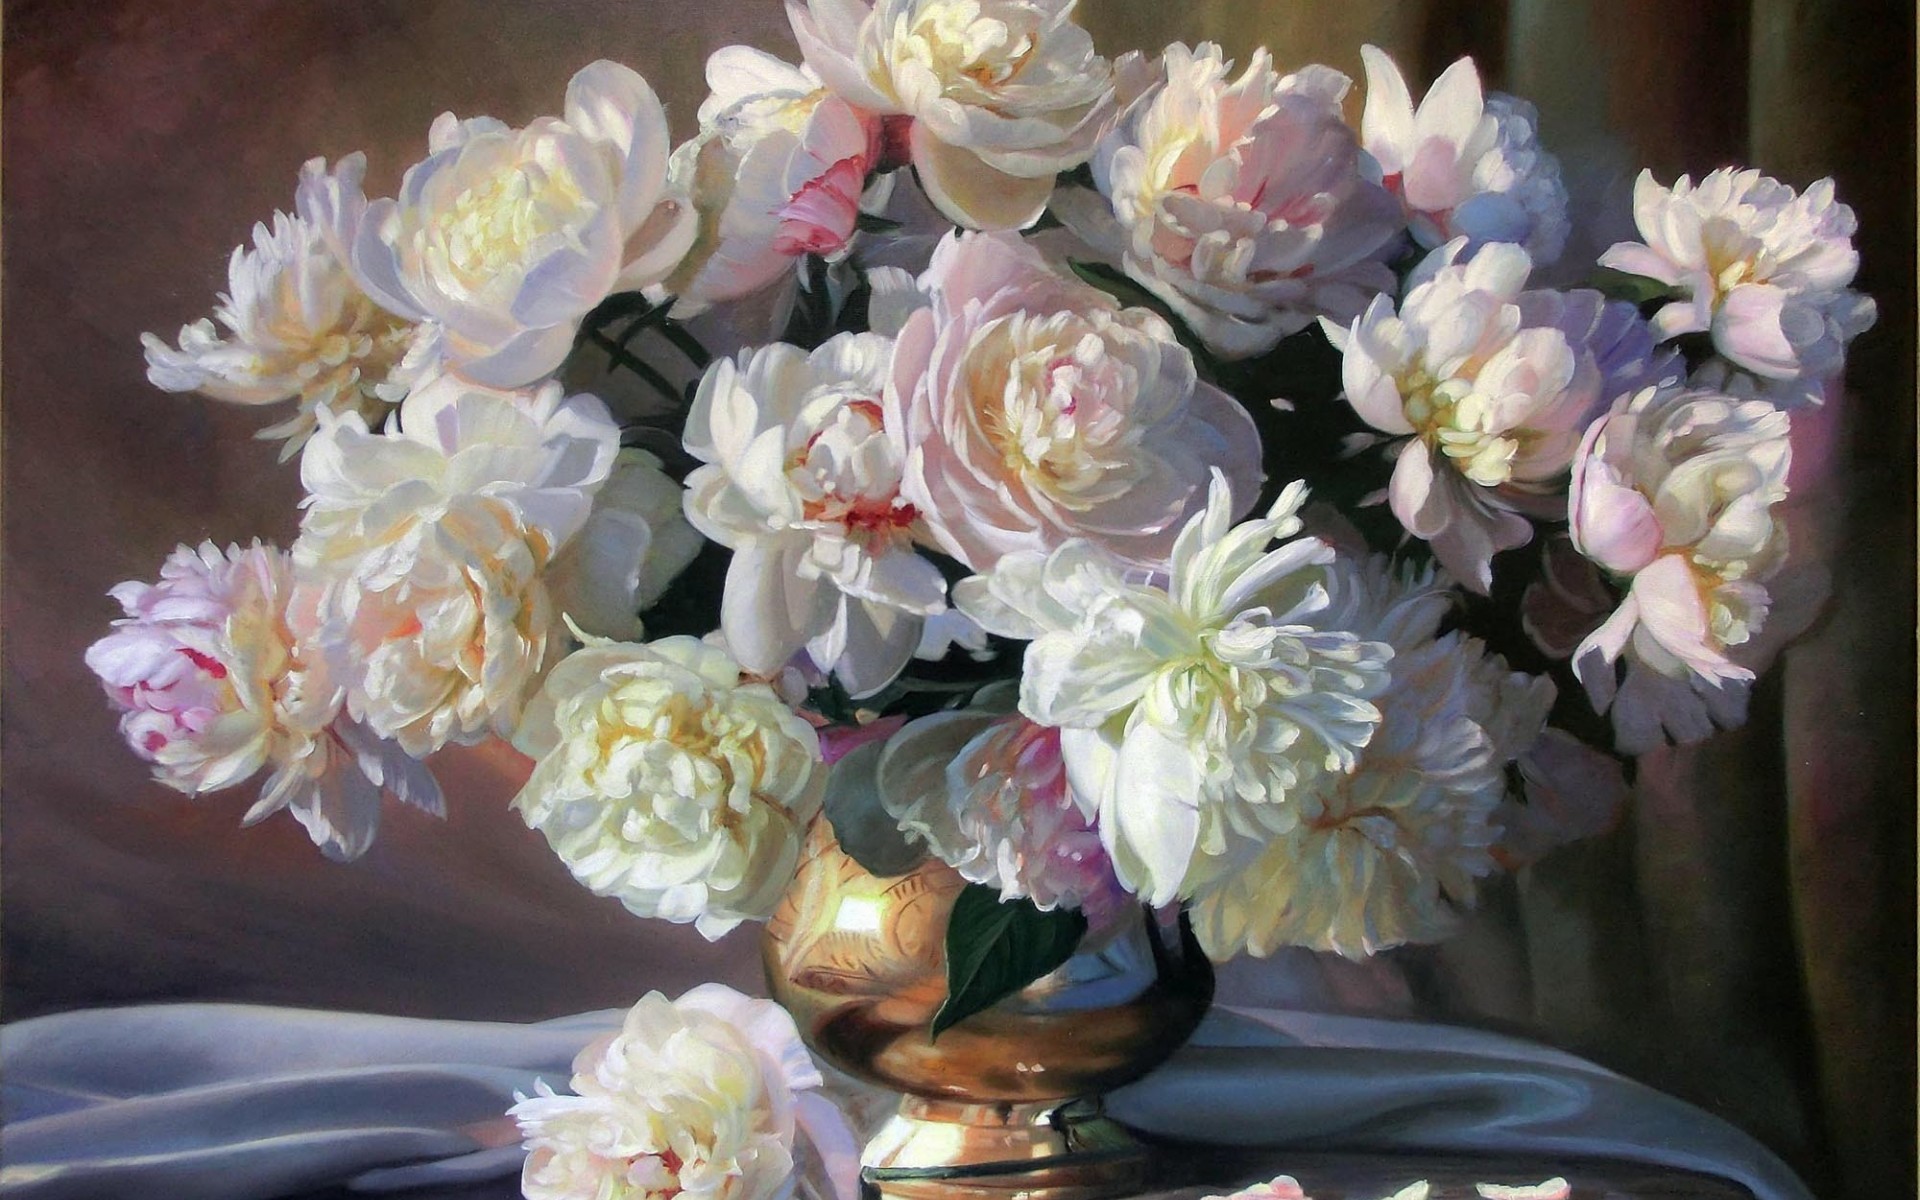 painting, Still, Life, Zbigniew, Kopania, Flowers, Peonies, White, Bouquet, Vase, Petals, Fabric, Painting, Paintings Wallpaper